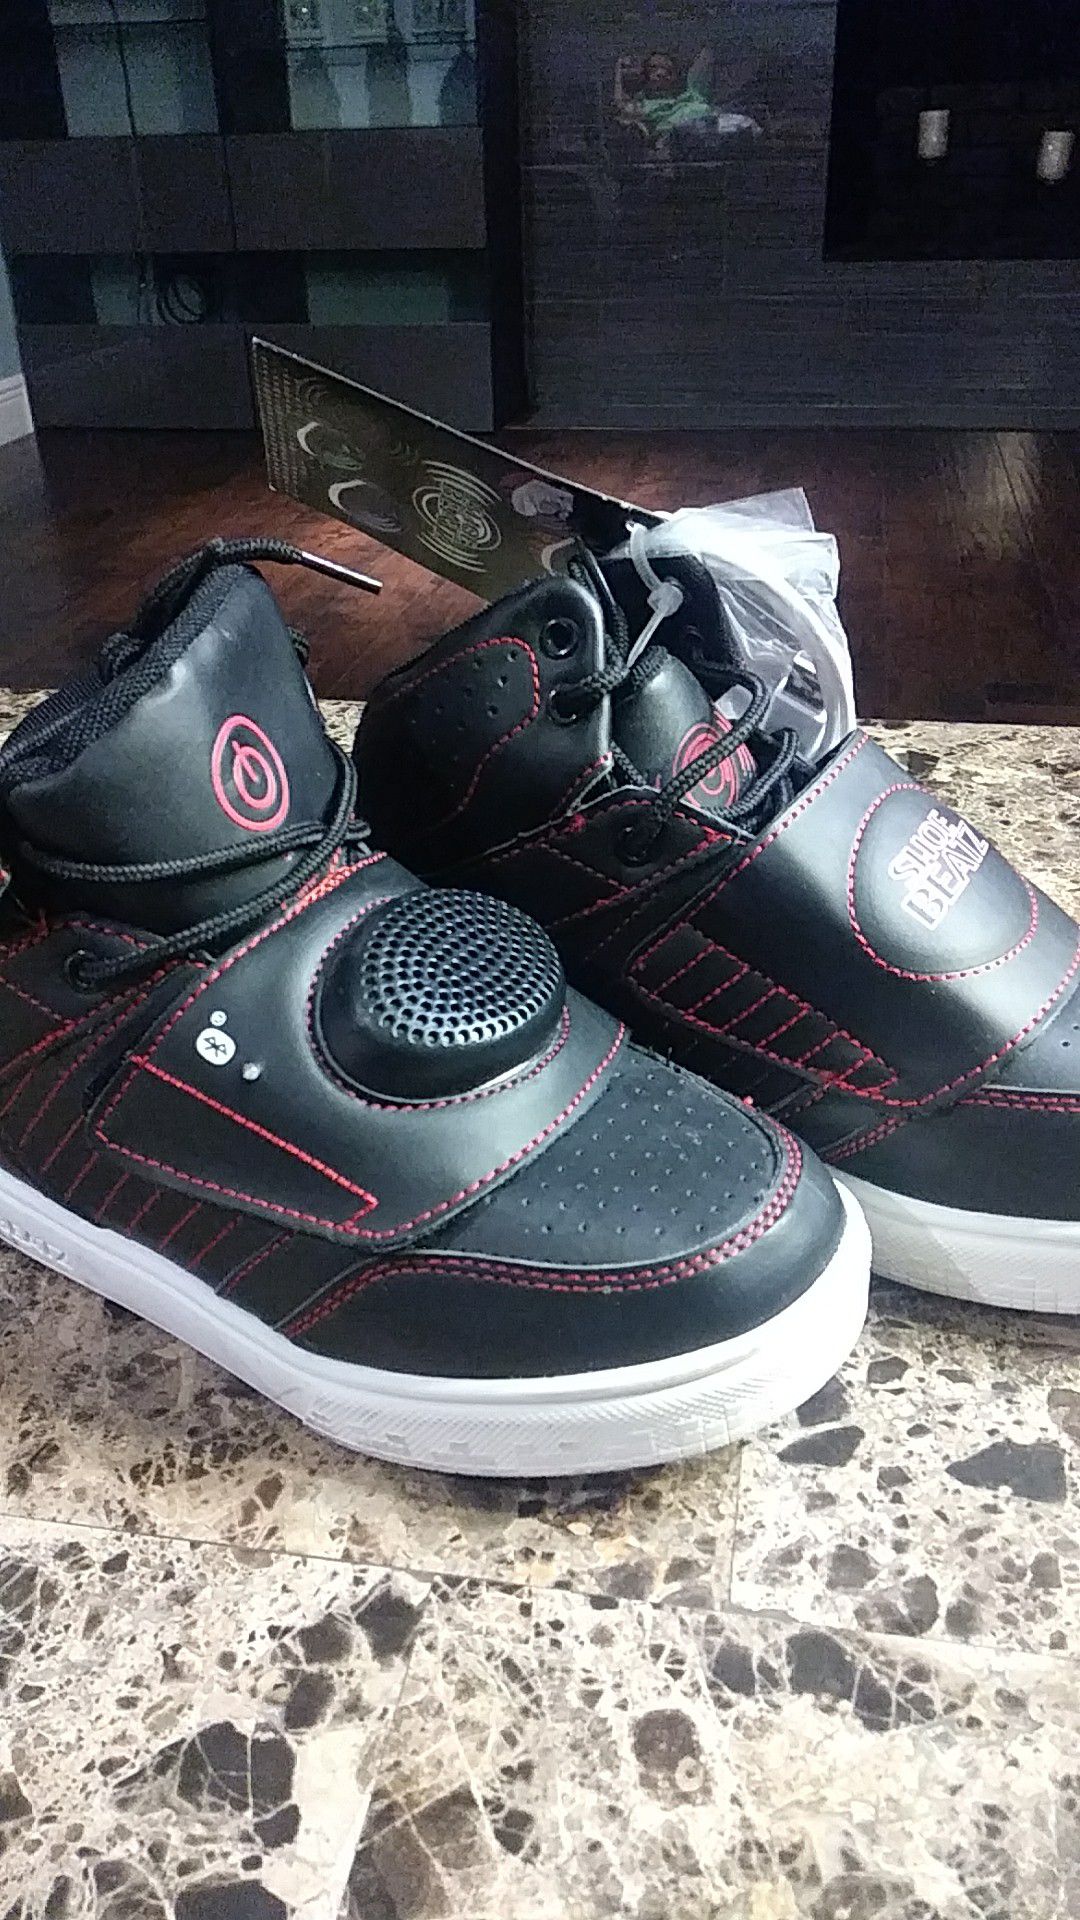 Kids Sneakers(size 3) with Bluetooth speakers